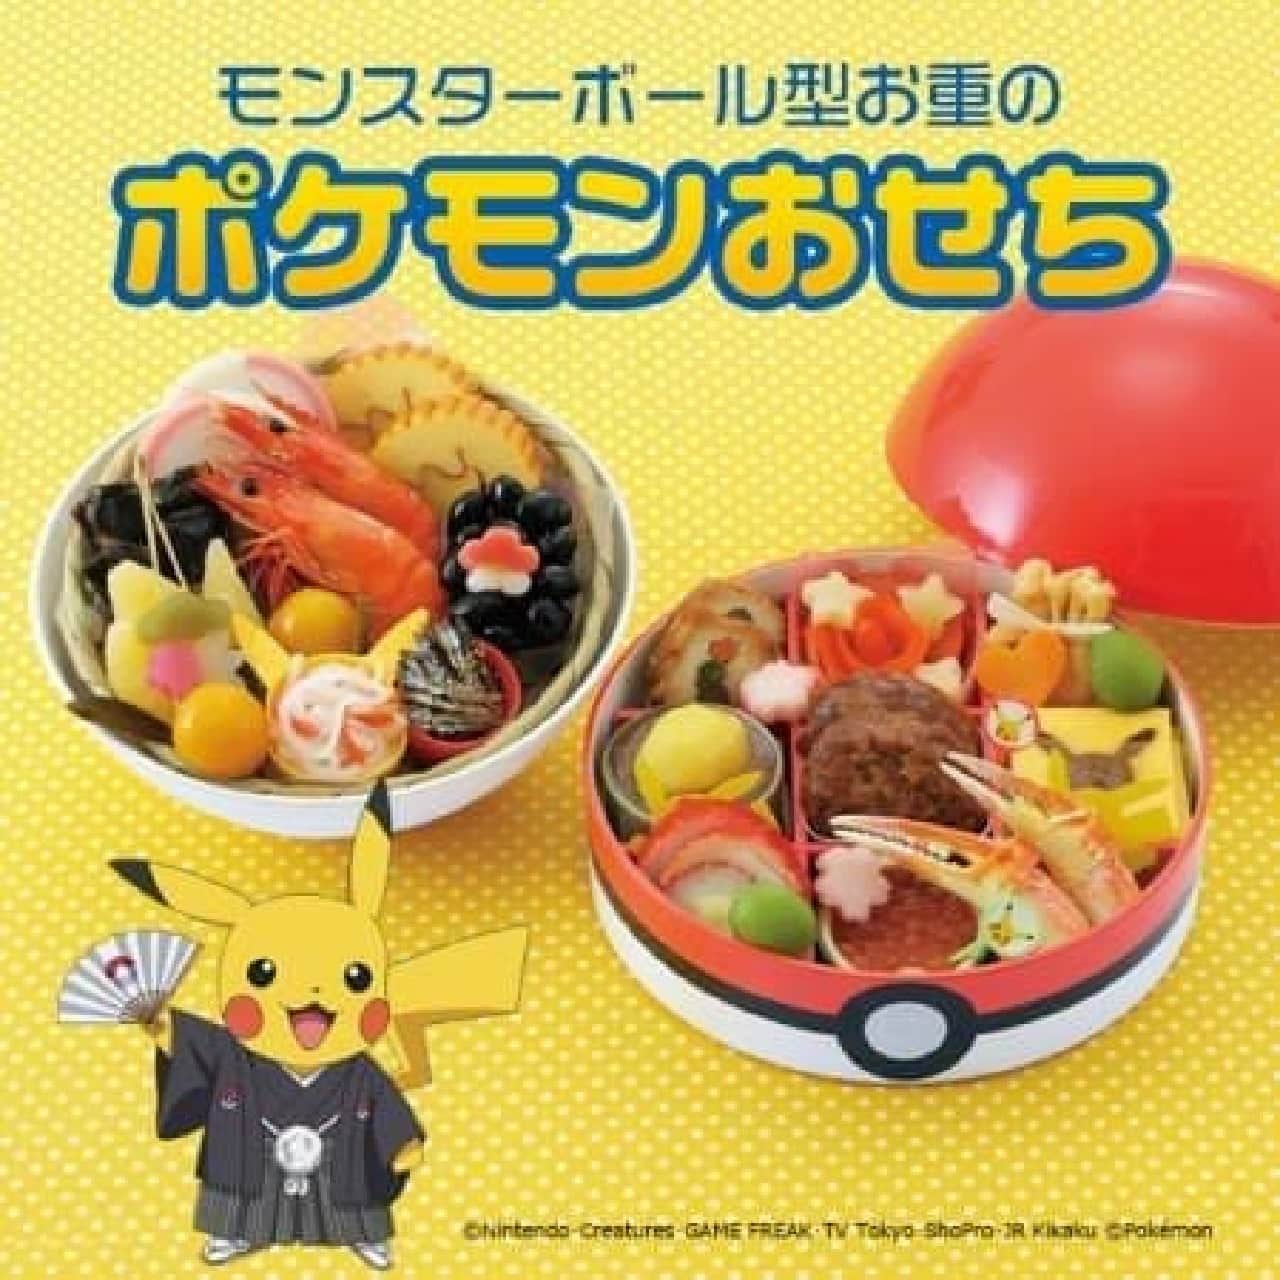 I want to throw it, but don't throw it! "Pokemon New Year dishes"